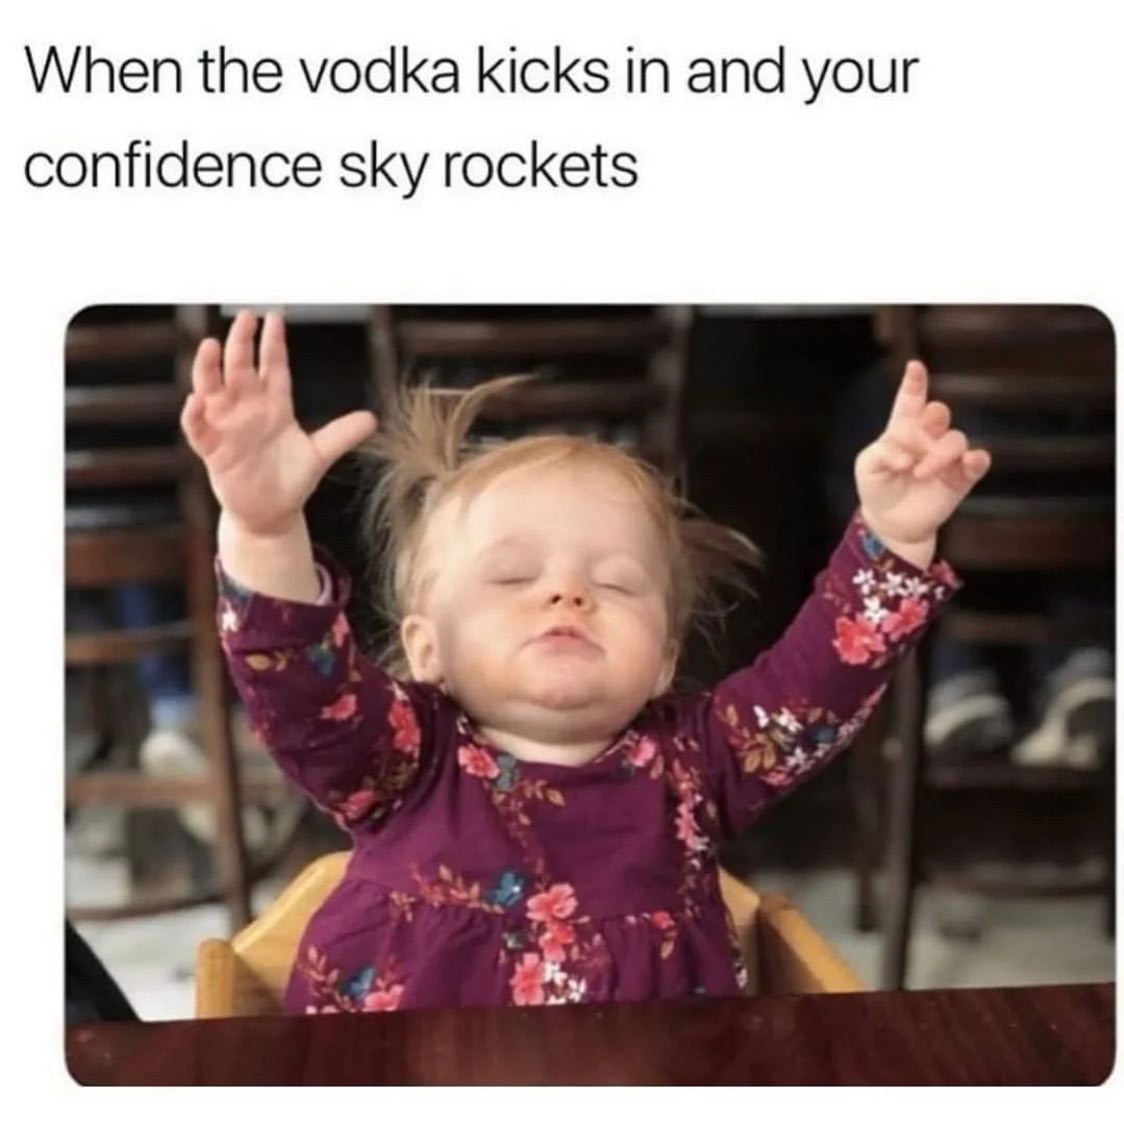 When the vodka kicks in and your confidence sky rockets.